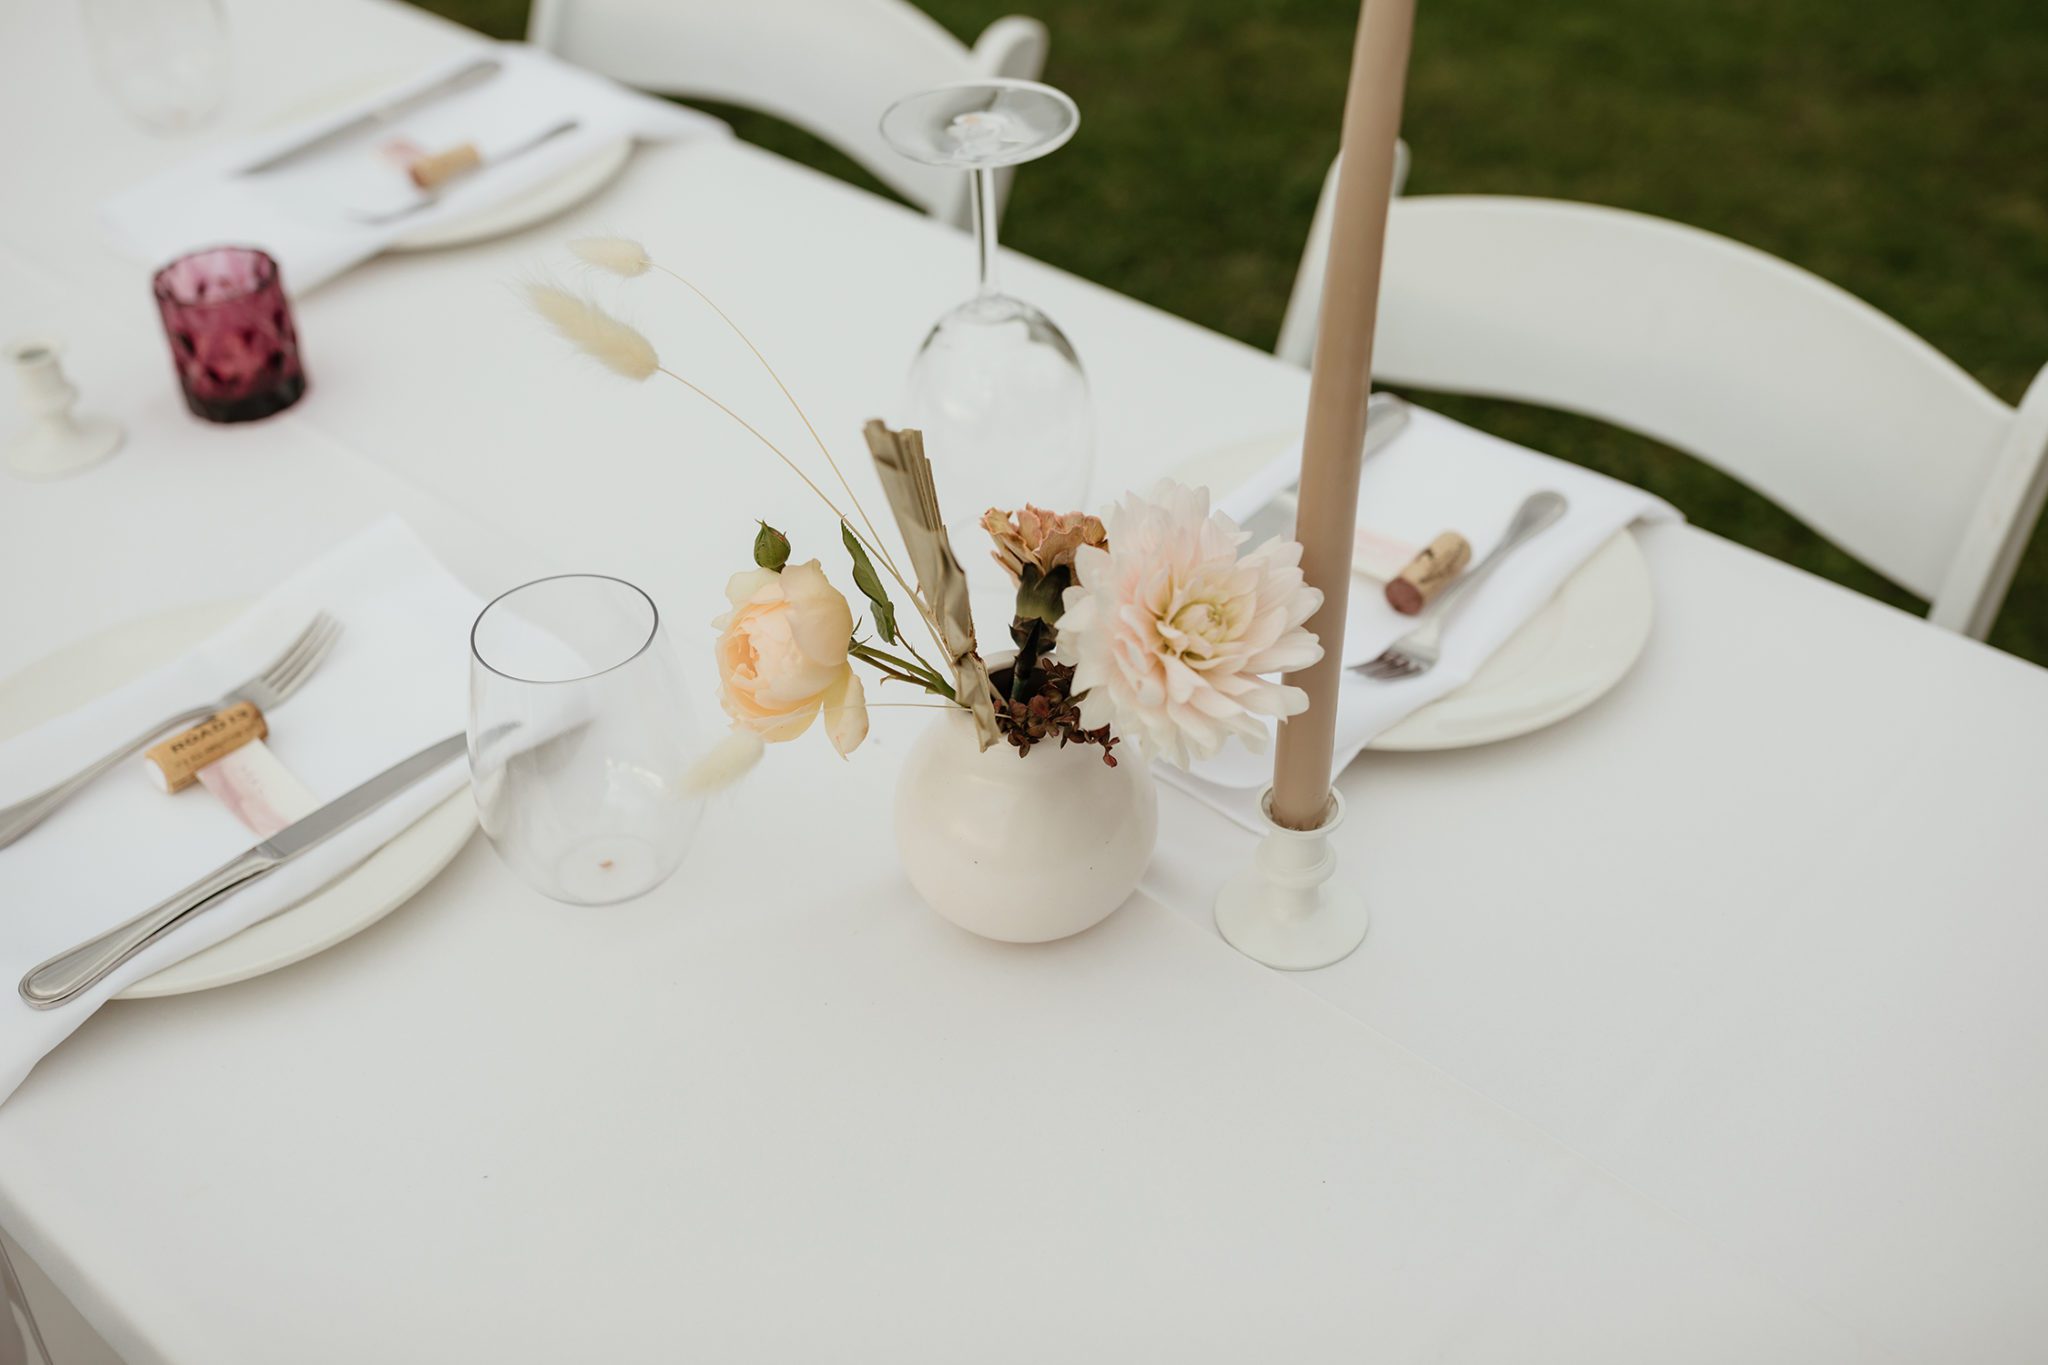 Blush and white table decor inspiration for your outdoor summer wedding reception